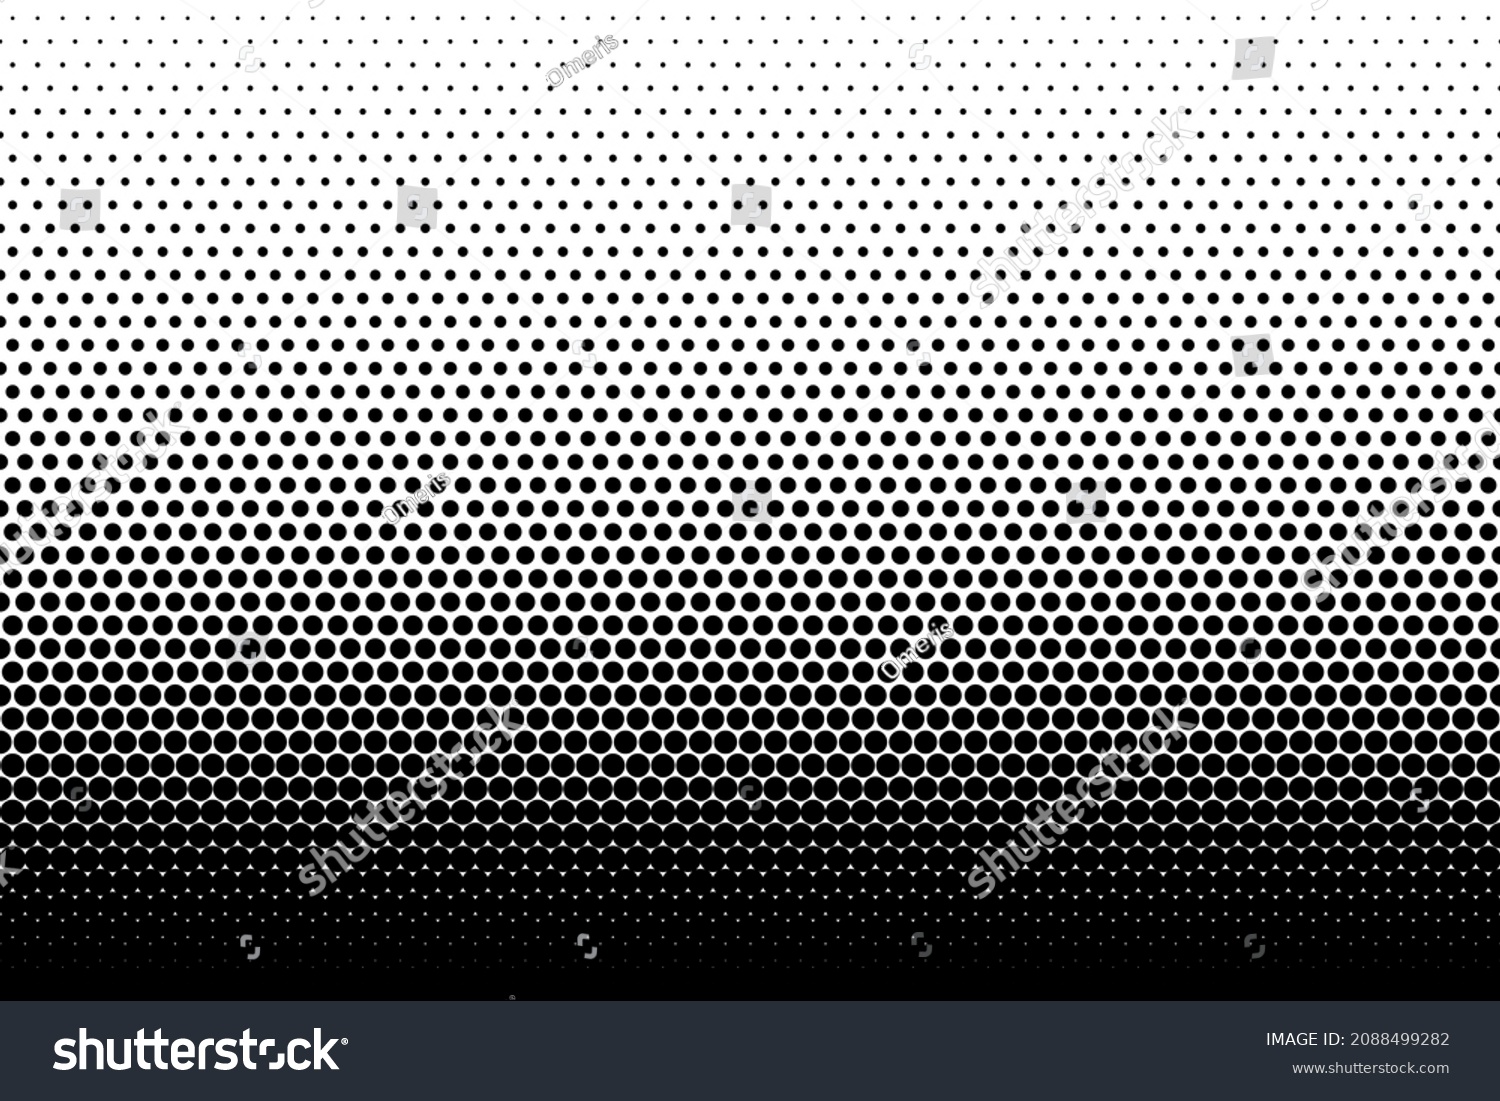 Halftone seamless pattern. Dot background. Gradient faded dots. Half tone texture. Gradation patern. Black circle isolated on white backdrop for overlay effect. Geometric bg. Vector illustration #2088499282